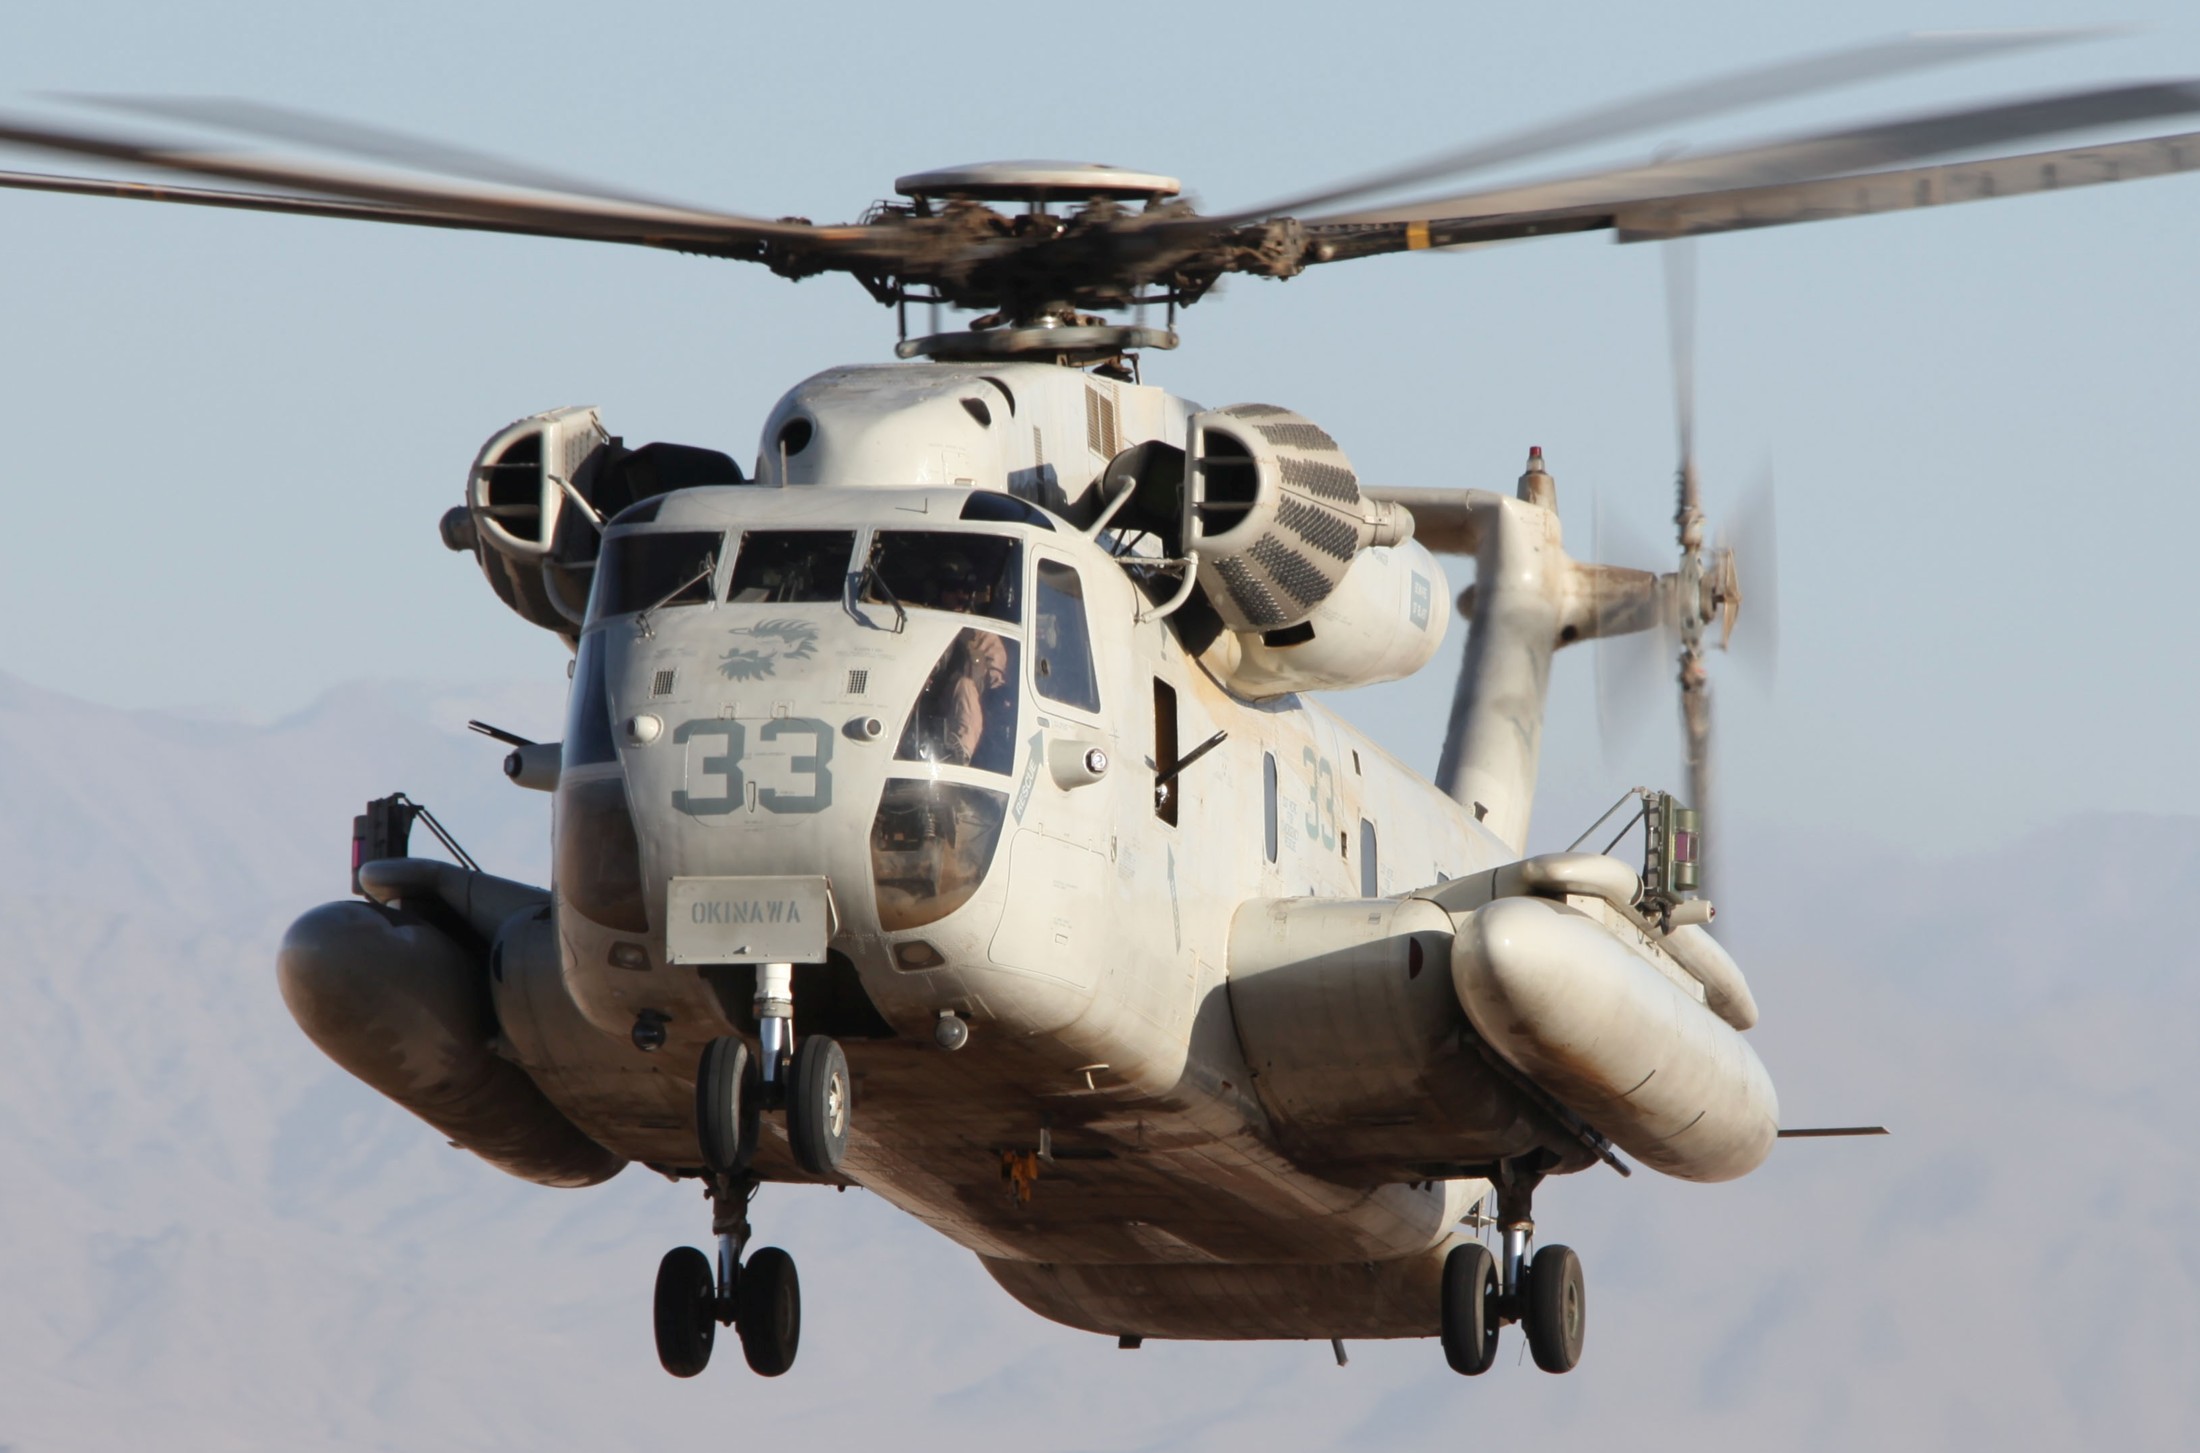 hmh-362 ugly angels marine heavy helicopter squadron usmc sikorsky ch-53d sea stallion 31